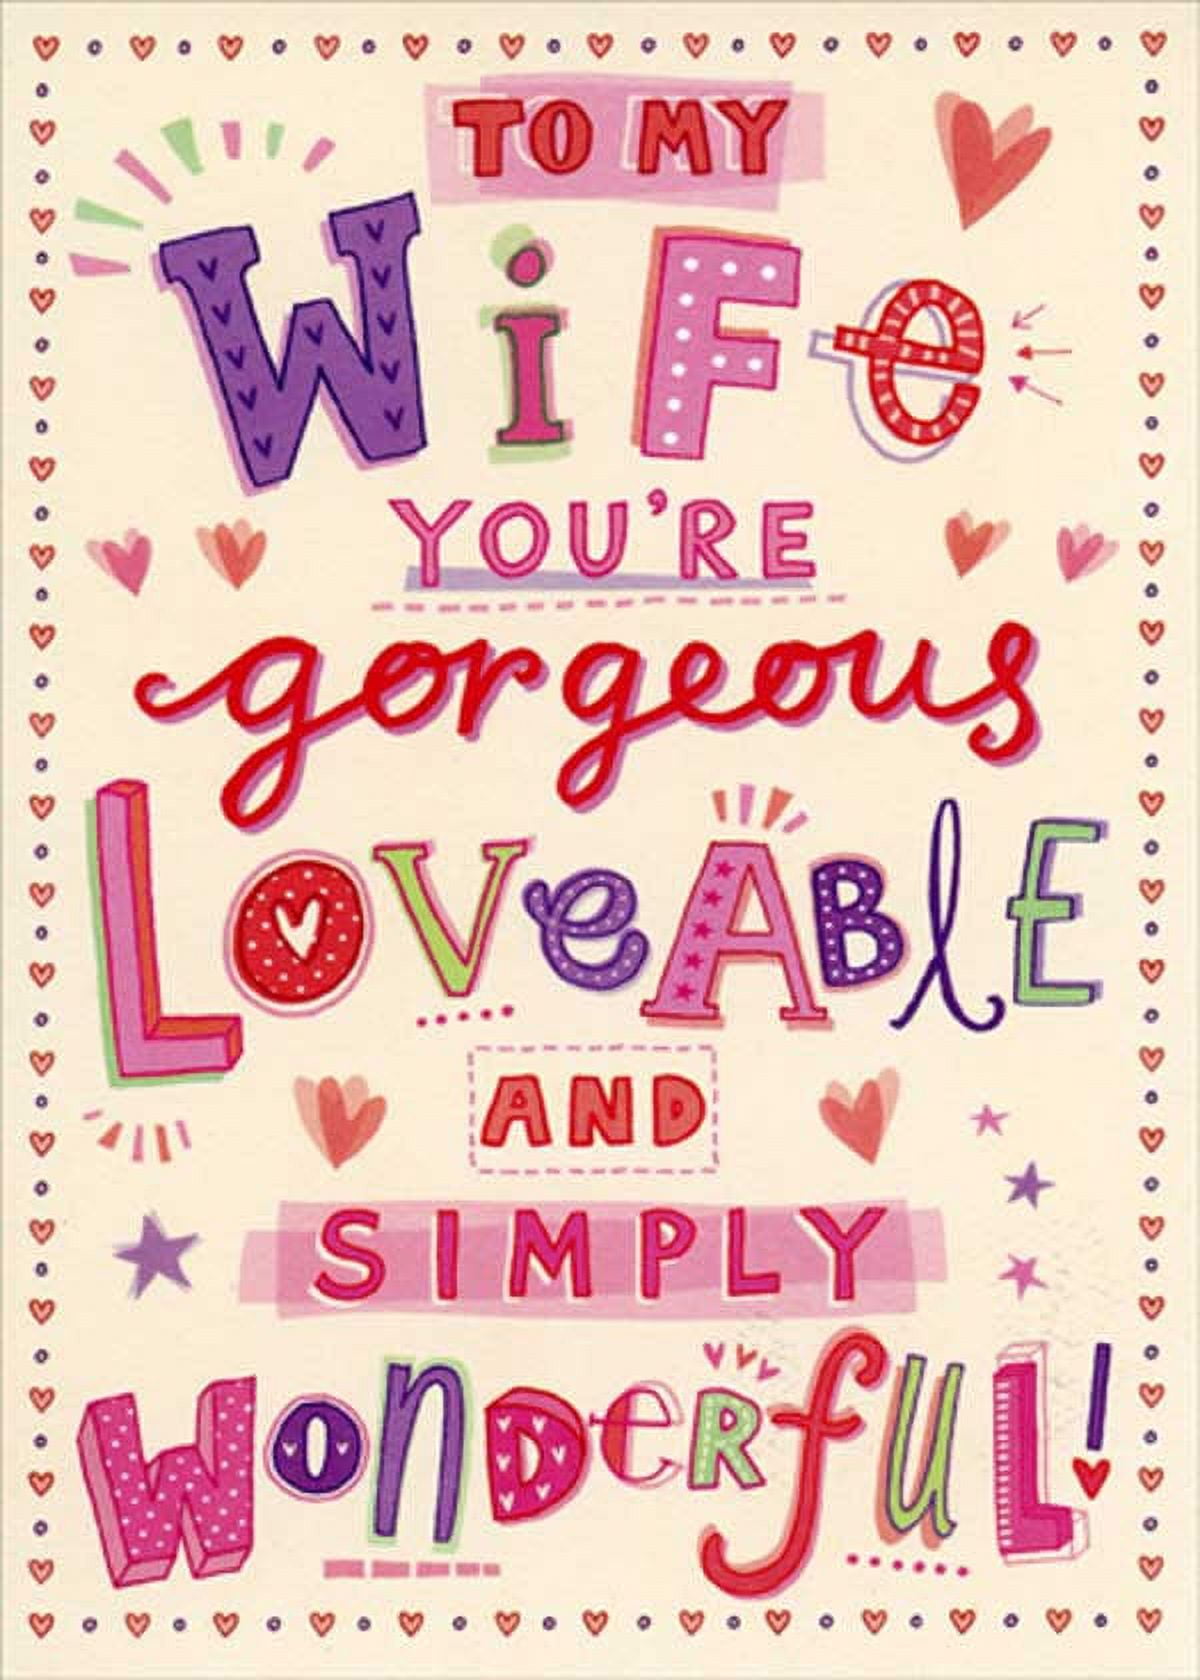 RSVP Gorgeous, Loveable and Simply Wonderful Birthday Card for Wife ...